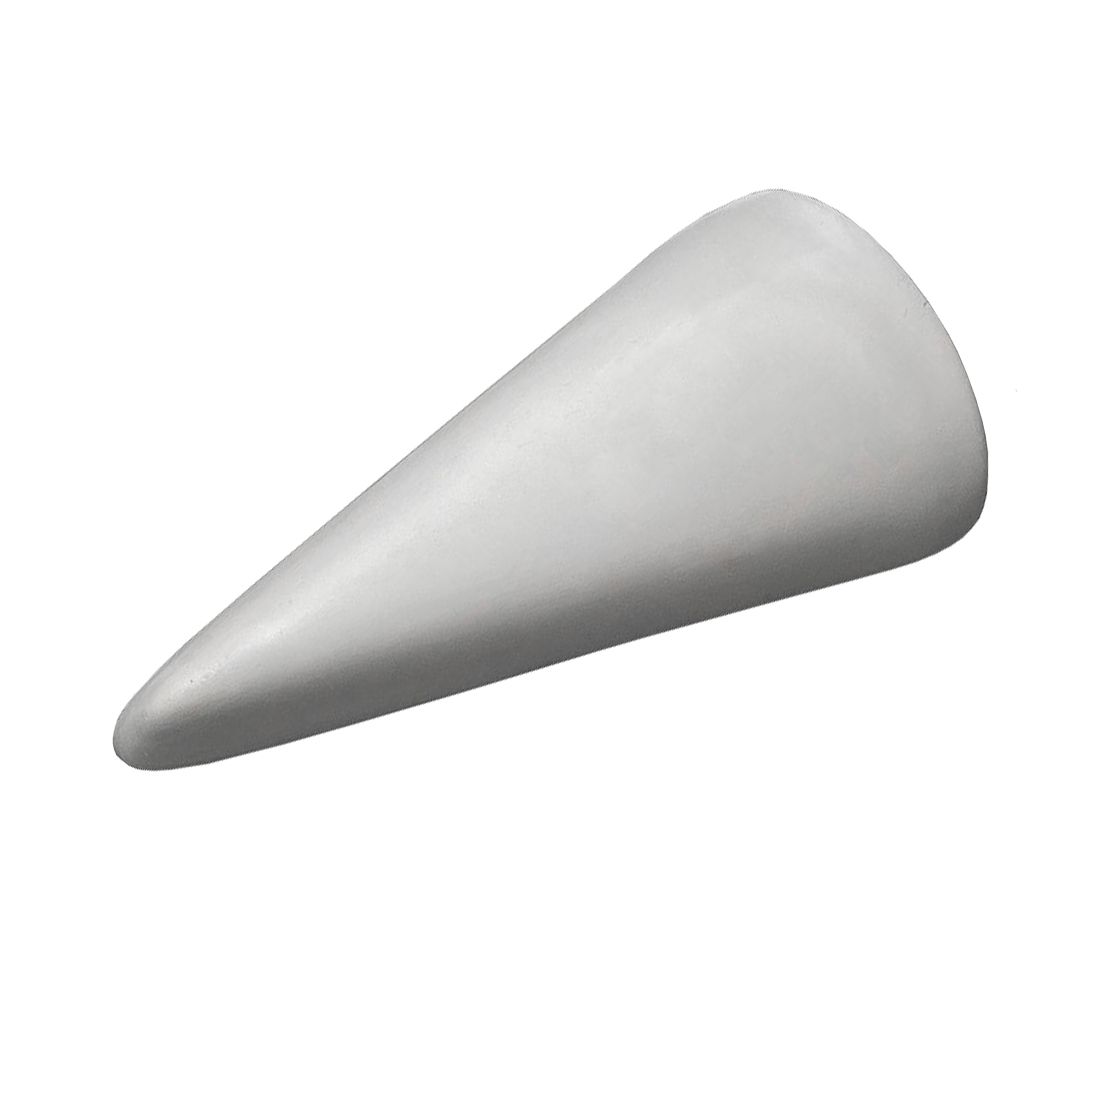 SMALL CONICAL DRAPE  MOLD by CPI